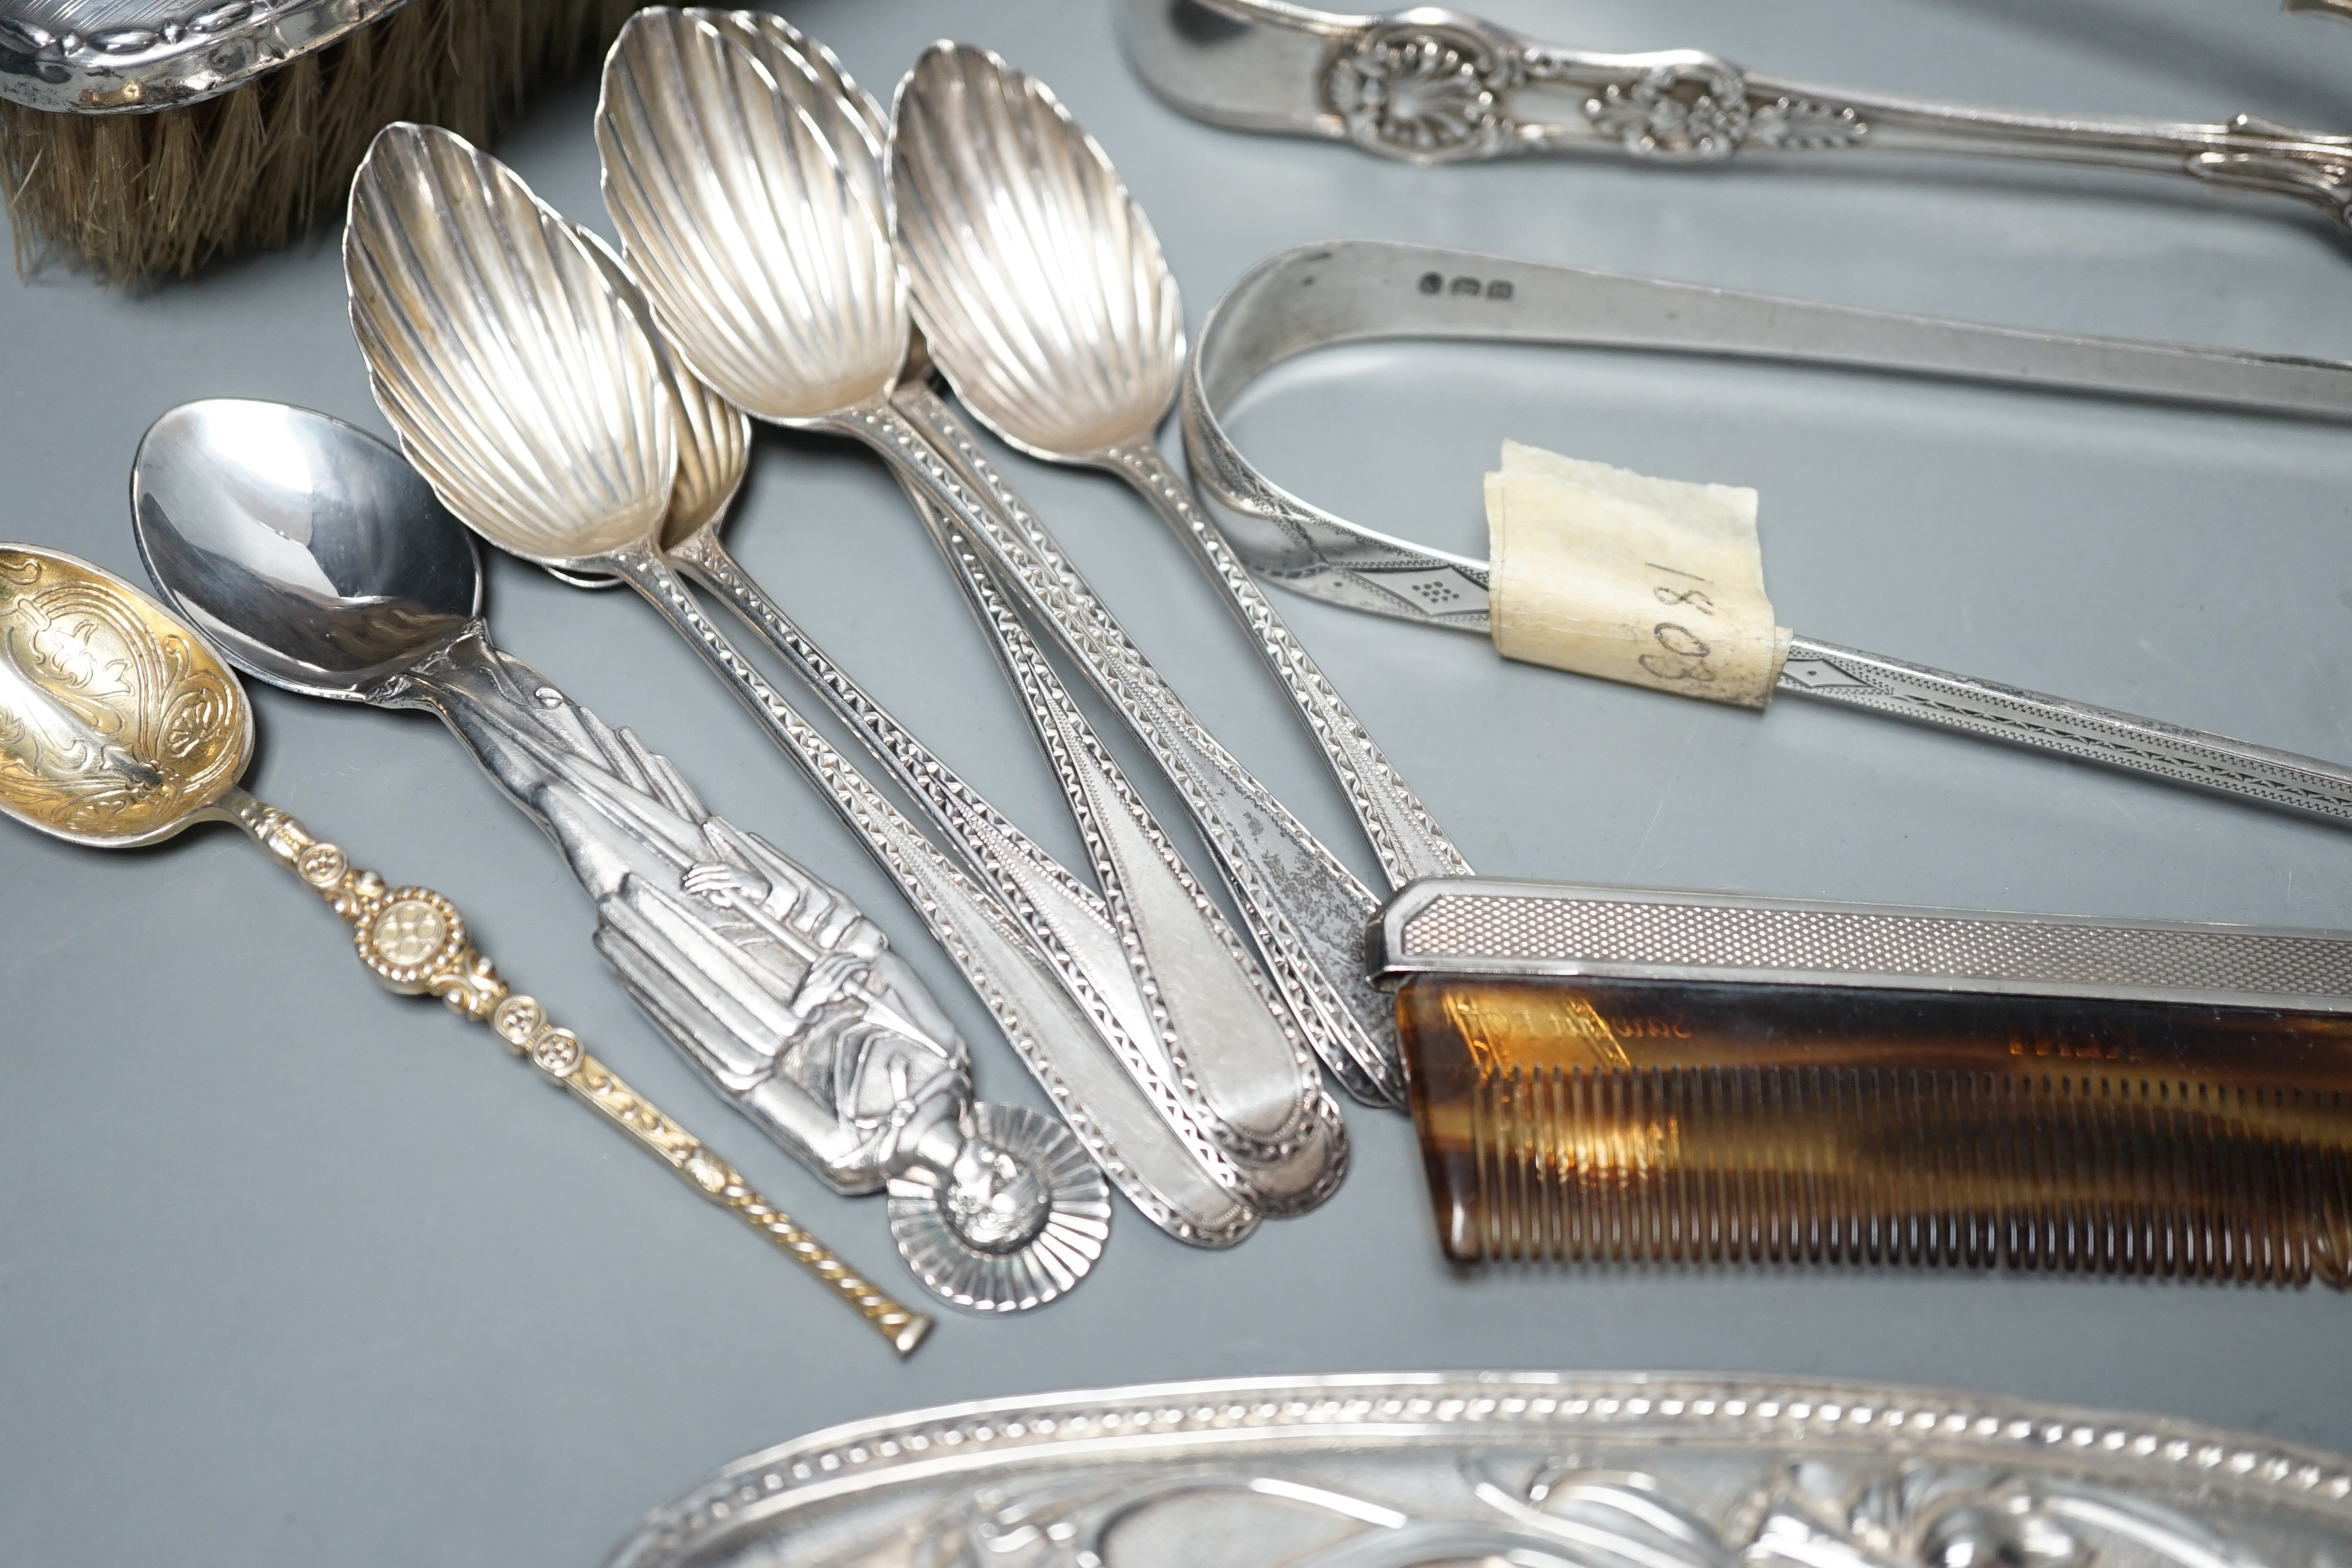 A small quantity of assorted silver flatware including a set of six teaspoons, by Peter, Ann & William Bateman, London, 1800, a pair of Victorian tablespoons, three pairs of silver sugar tongs etc. and a pewter spoon and